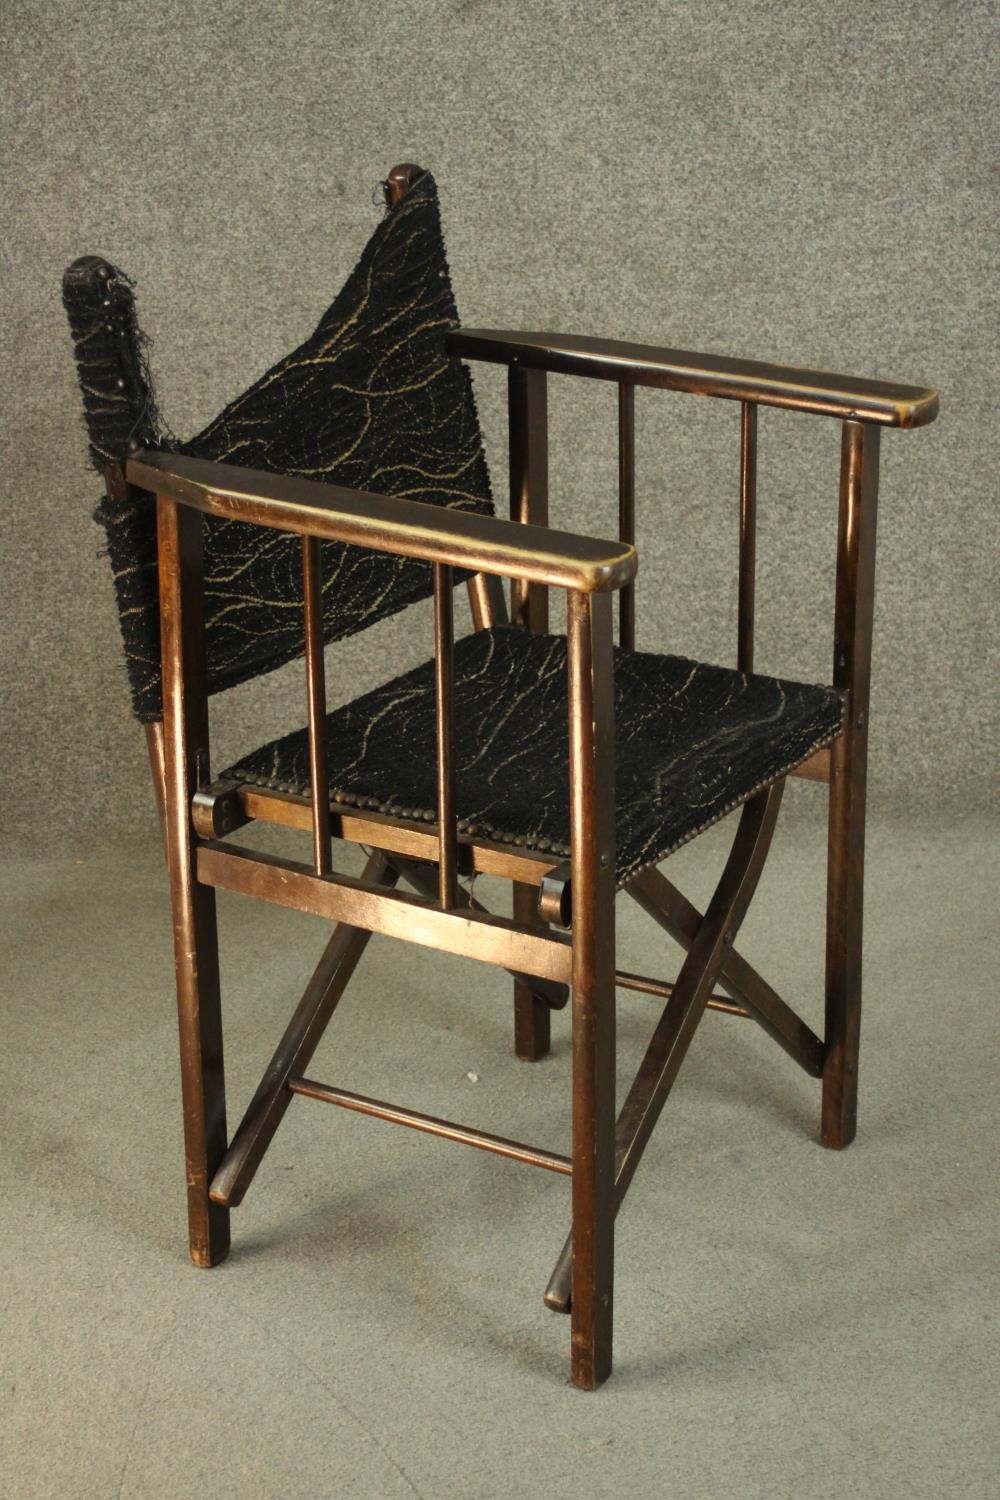 A 20th century 'Firma' folding campaign chair, upholstered in black fabric (damaged), made at the - Image 3 of 8